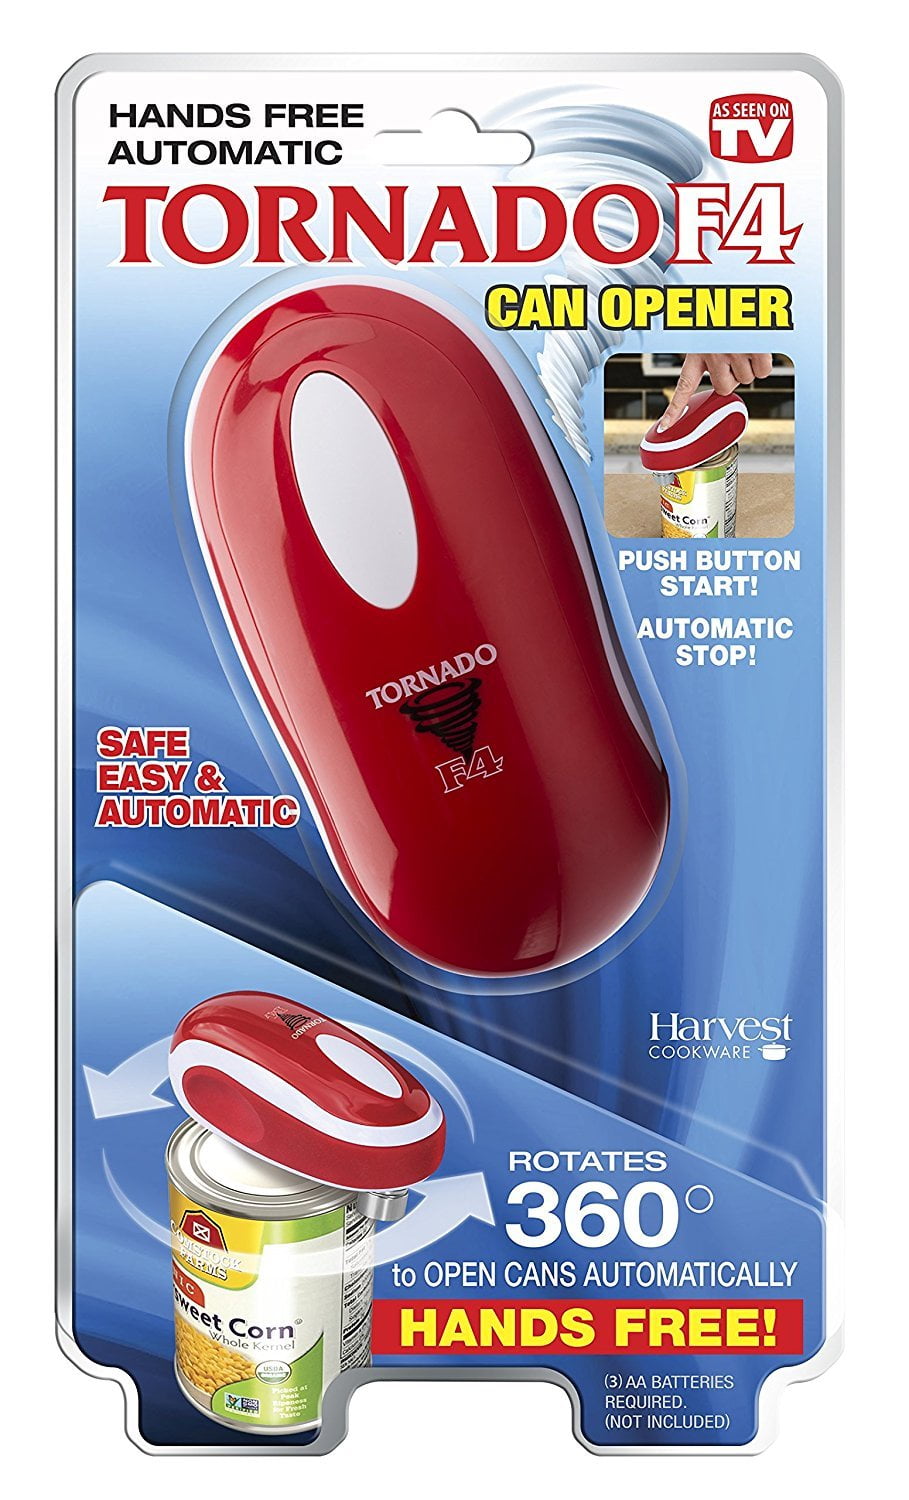  Tornado F4 Can Opener-Great for Arthritis Sufferers